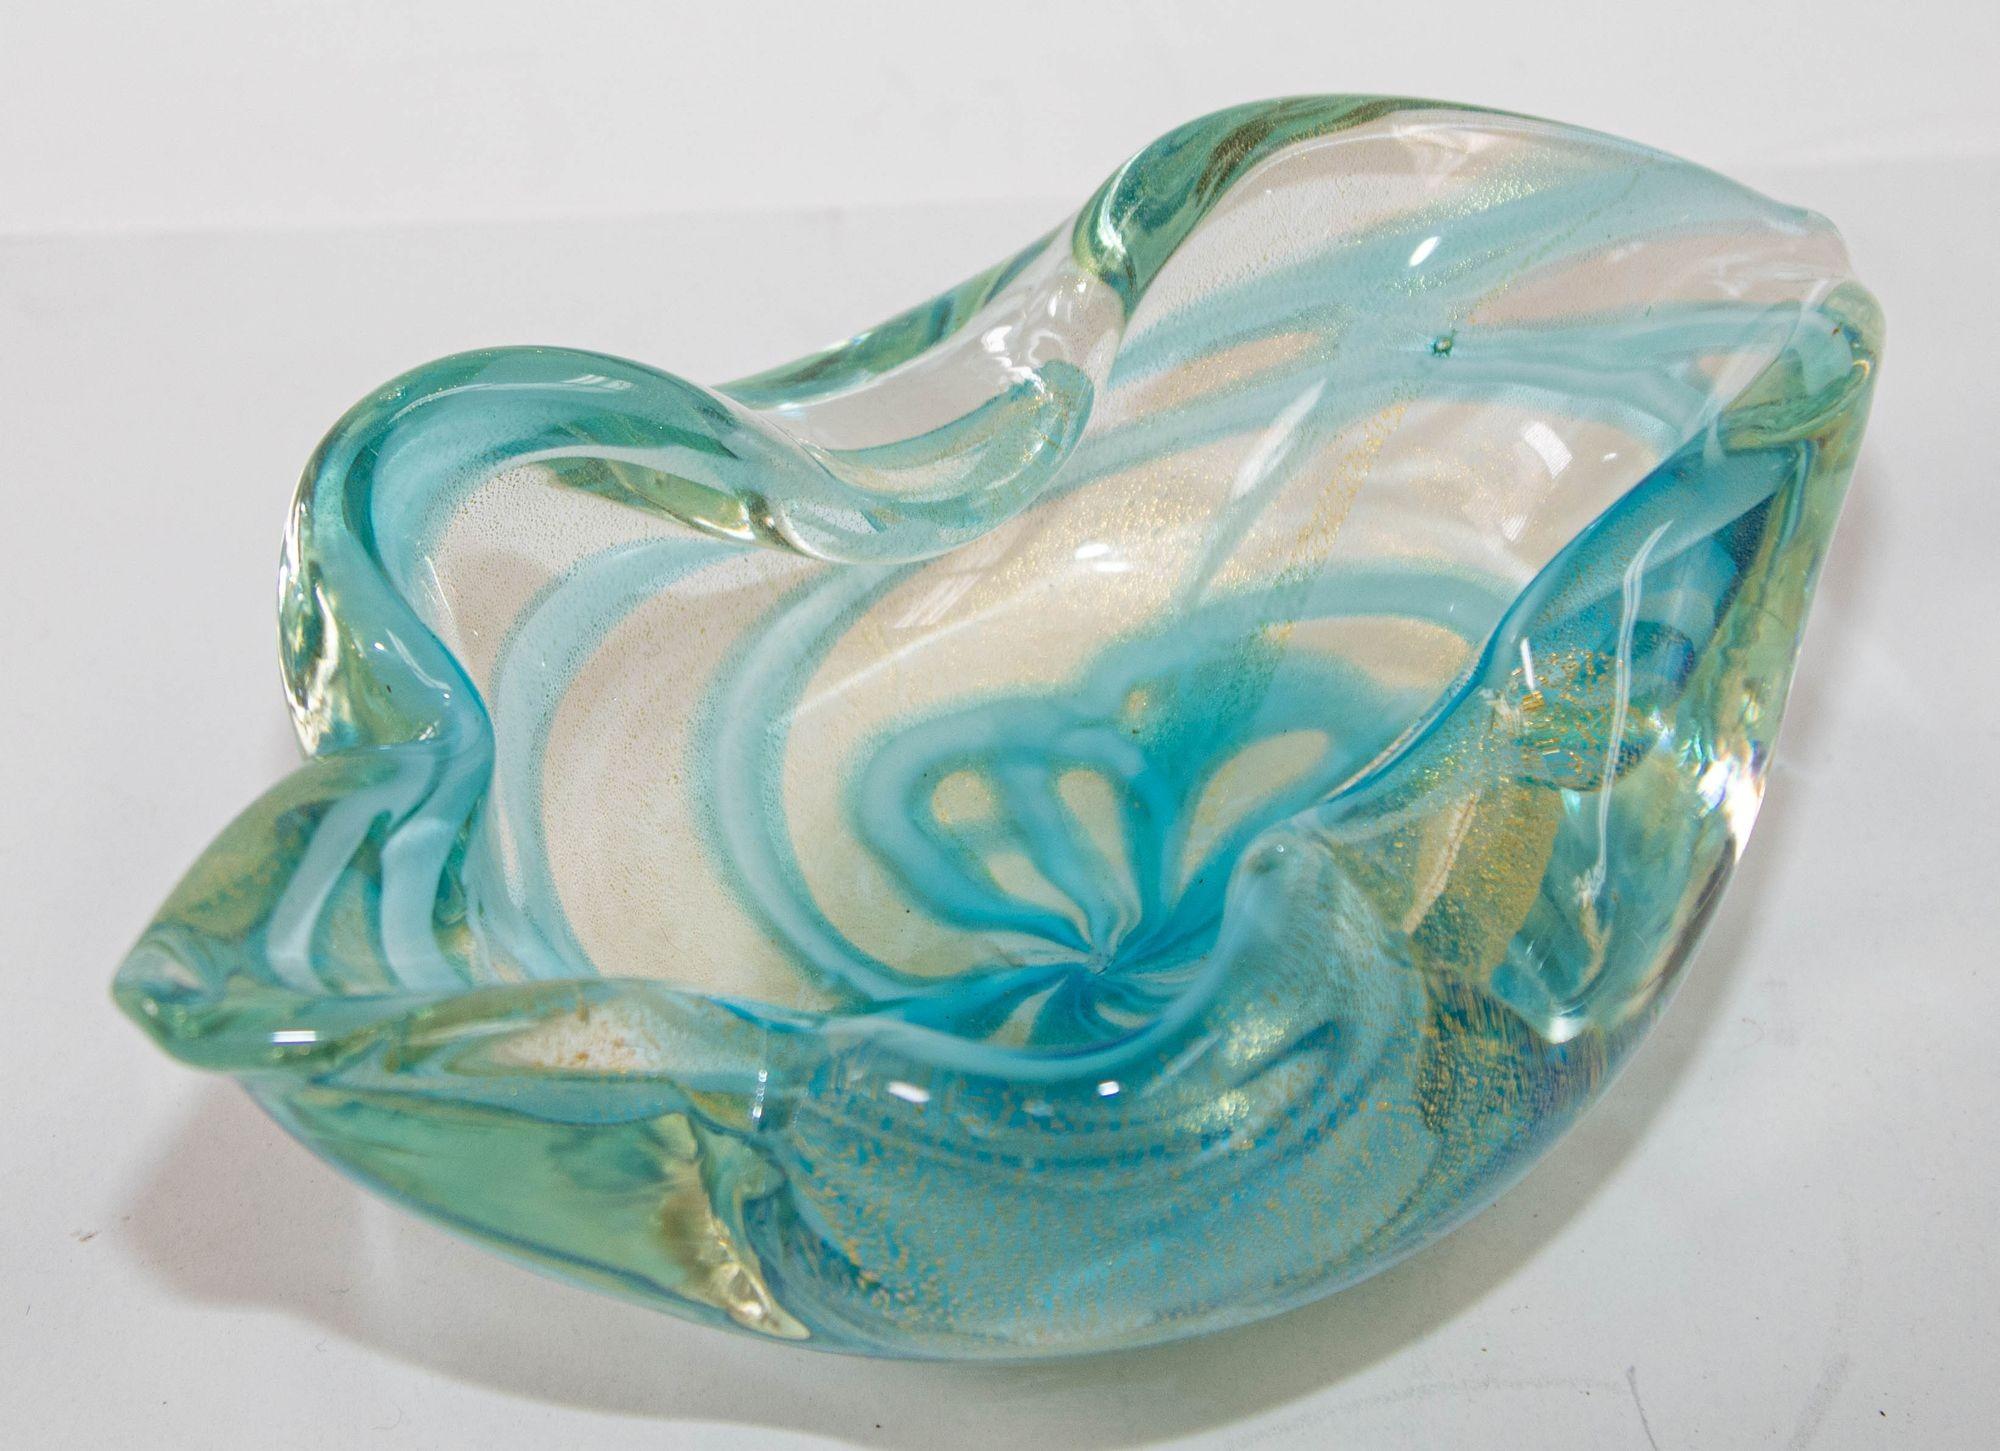 Mid-Century Modern Sculptural Aqua Blue & Gold Hand blown Murano Glass Bowl.
This elegant Mid-Century Modern decorative bowl was realized in Murano, Italy- the island off the coast of Venice renowned for centuries for its superlative glass